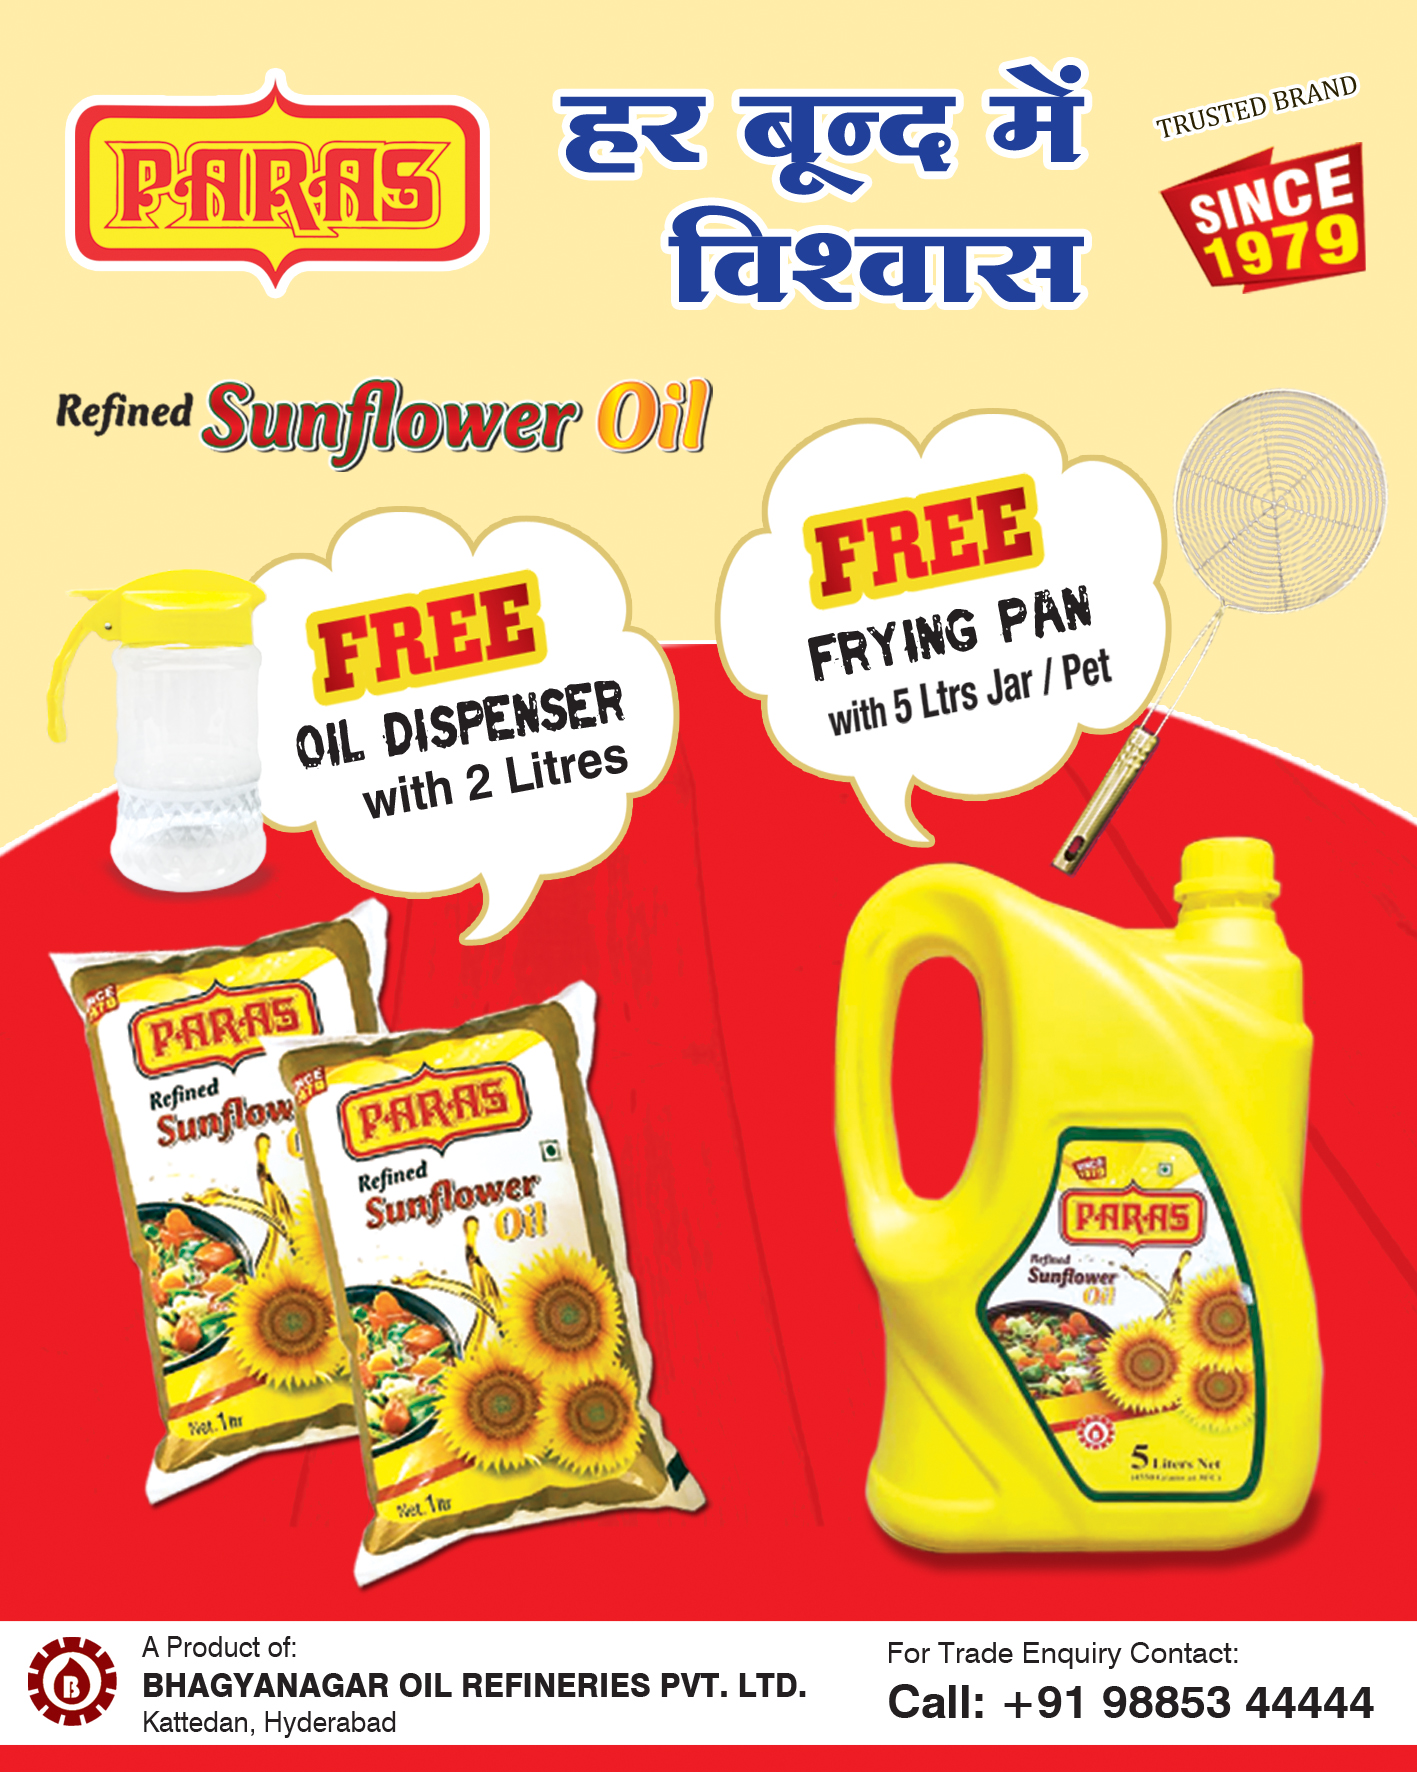 paras-refined-sunflower-oil-free-oil-dispenser-with-2-litres-ad-hindi-milap-hyderabad-30-08-2017